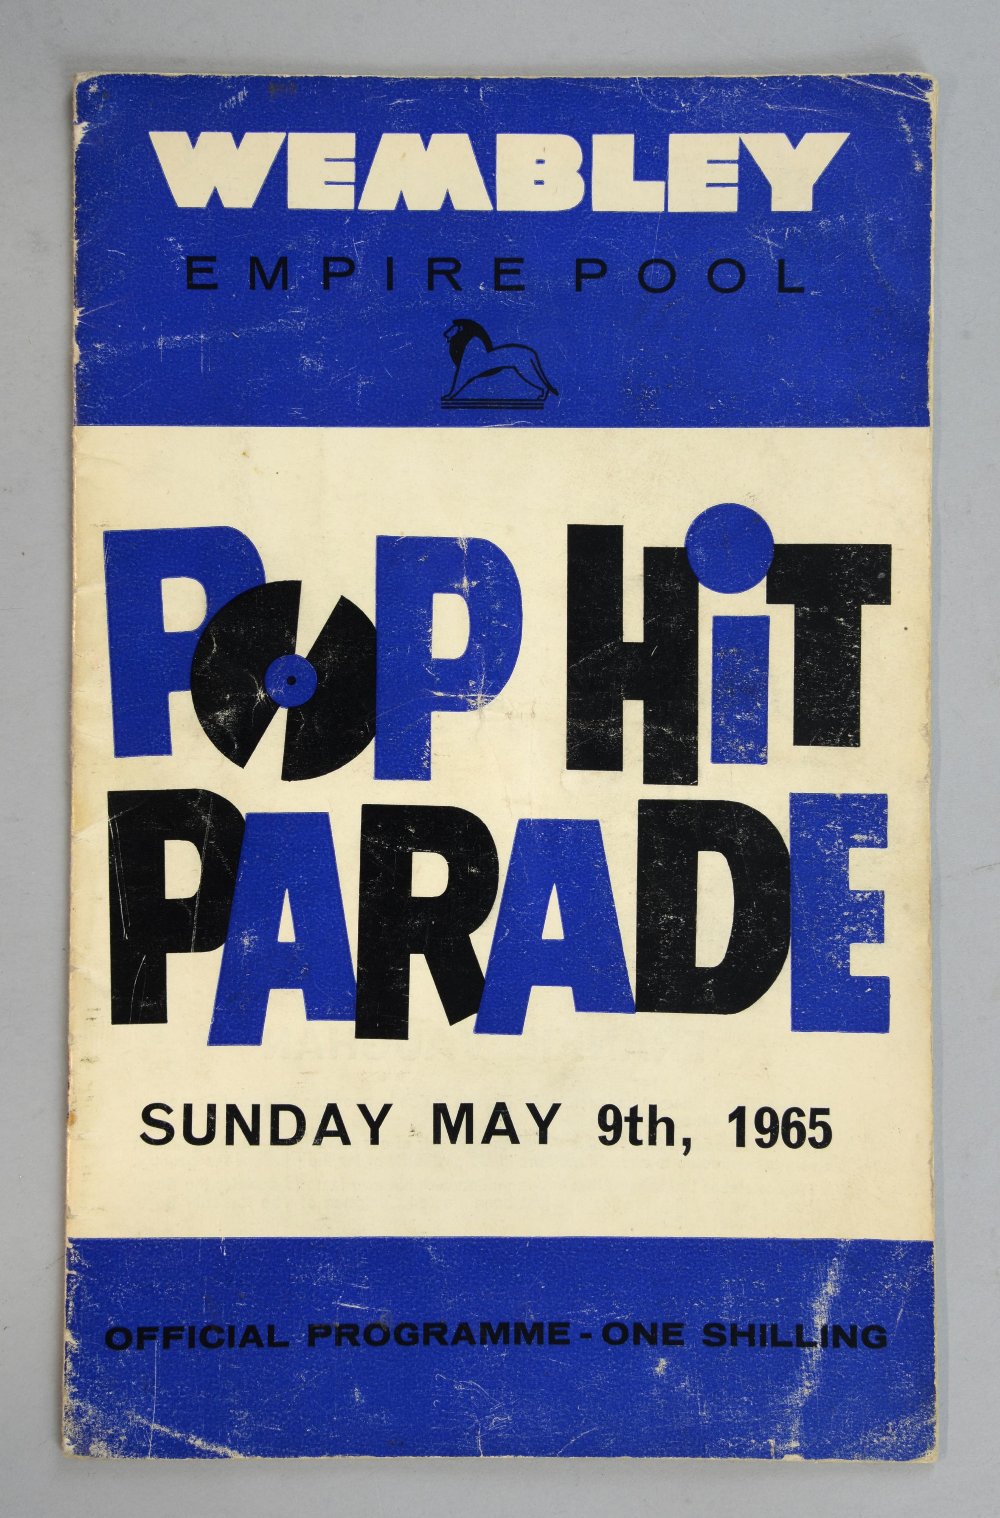 Pop Hit Parade concert programme, Sunday May 9th 1964 at the Wembley Empire Pool, London, starring